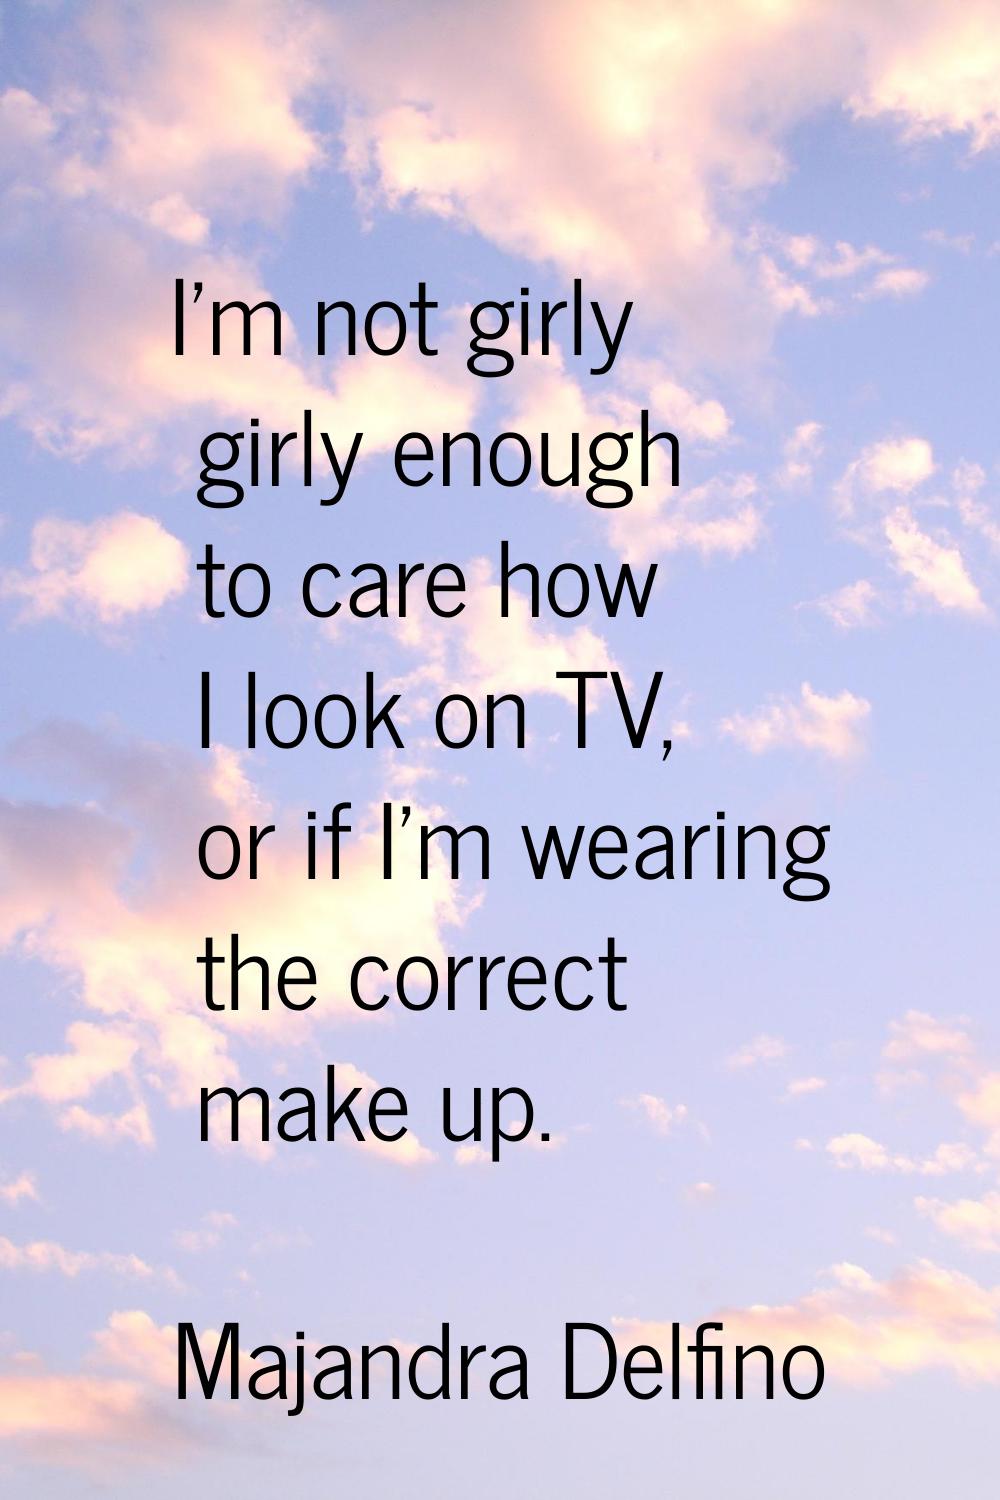 I'm not girly girly enough to care how I look on TV, or if I'm wearing the correct make up.